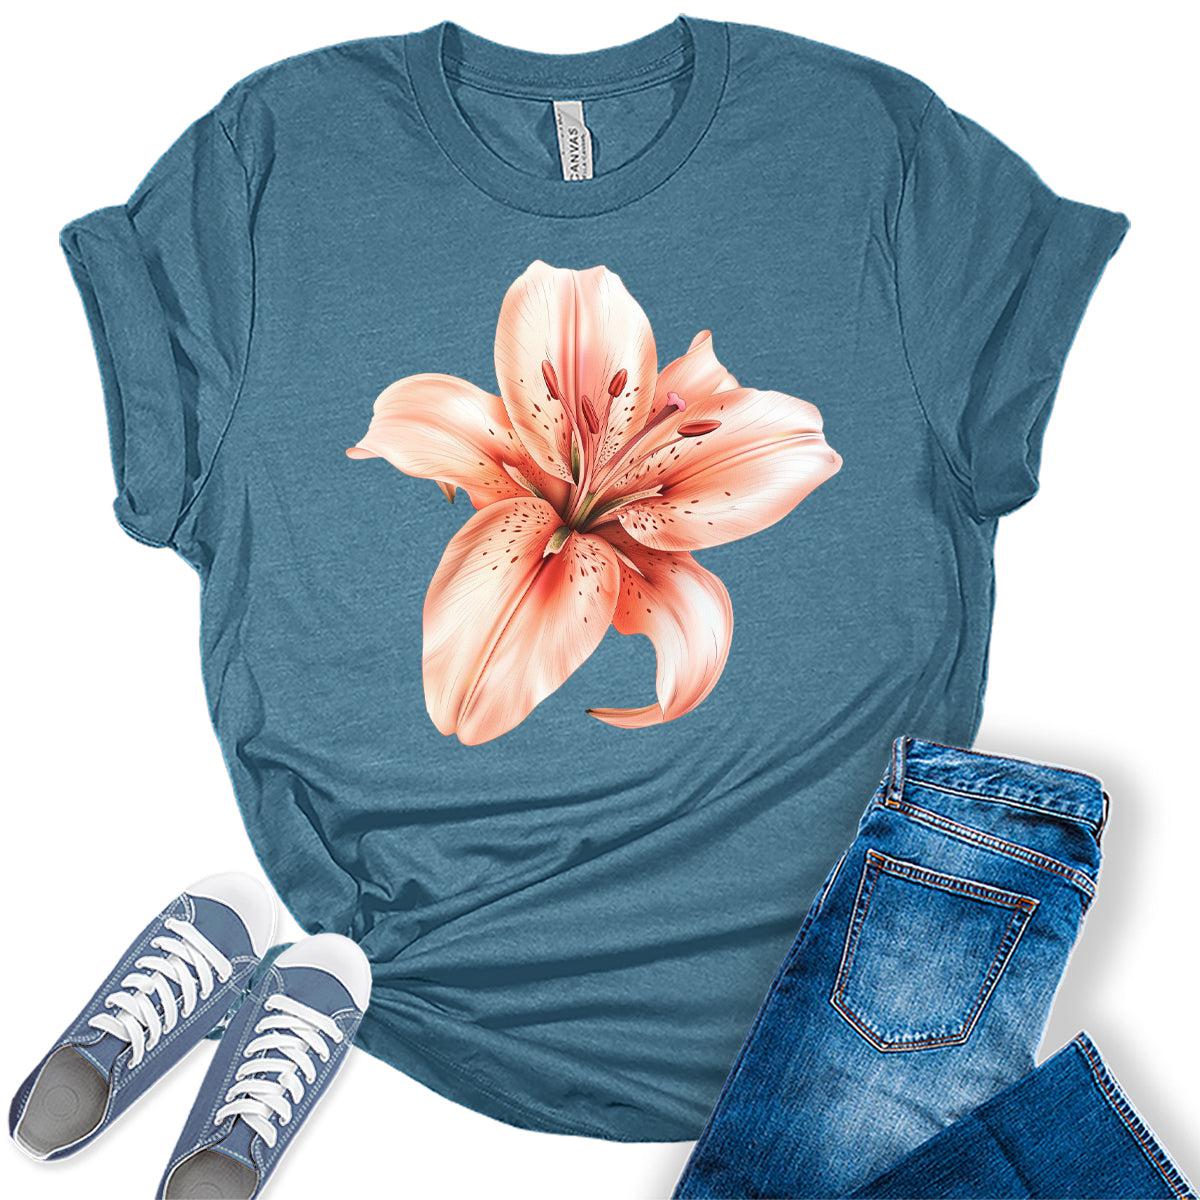 Women's Lily T-Shirt Cute Floral Trendy Graphic Tees Short Sleeve Casual Summer Tops